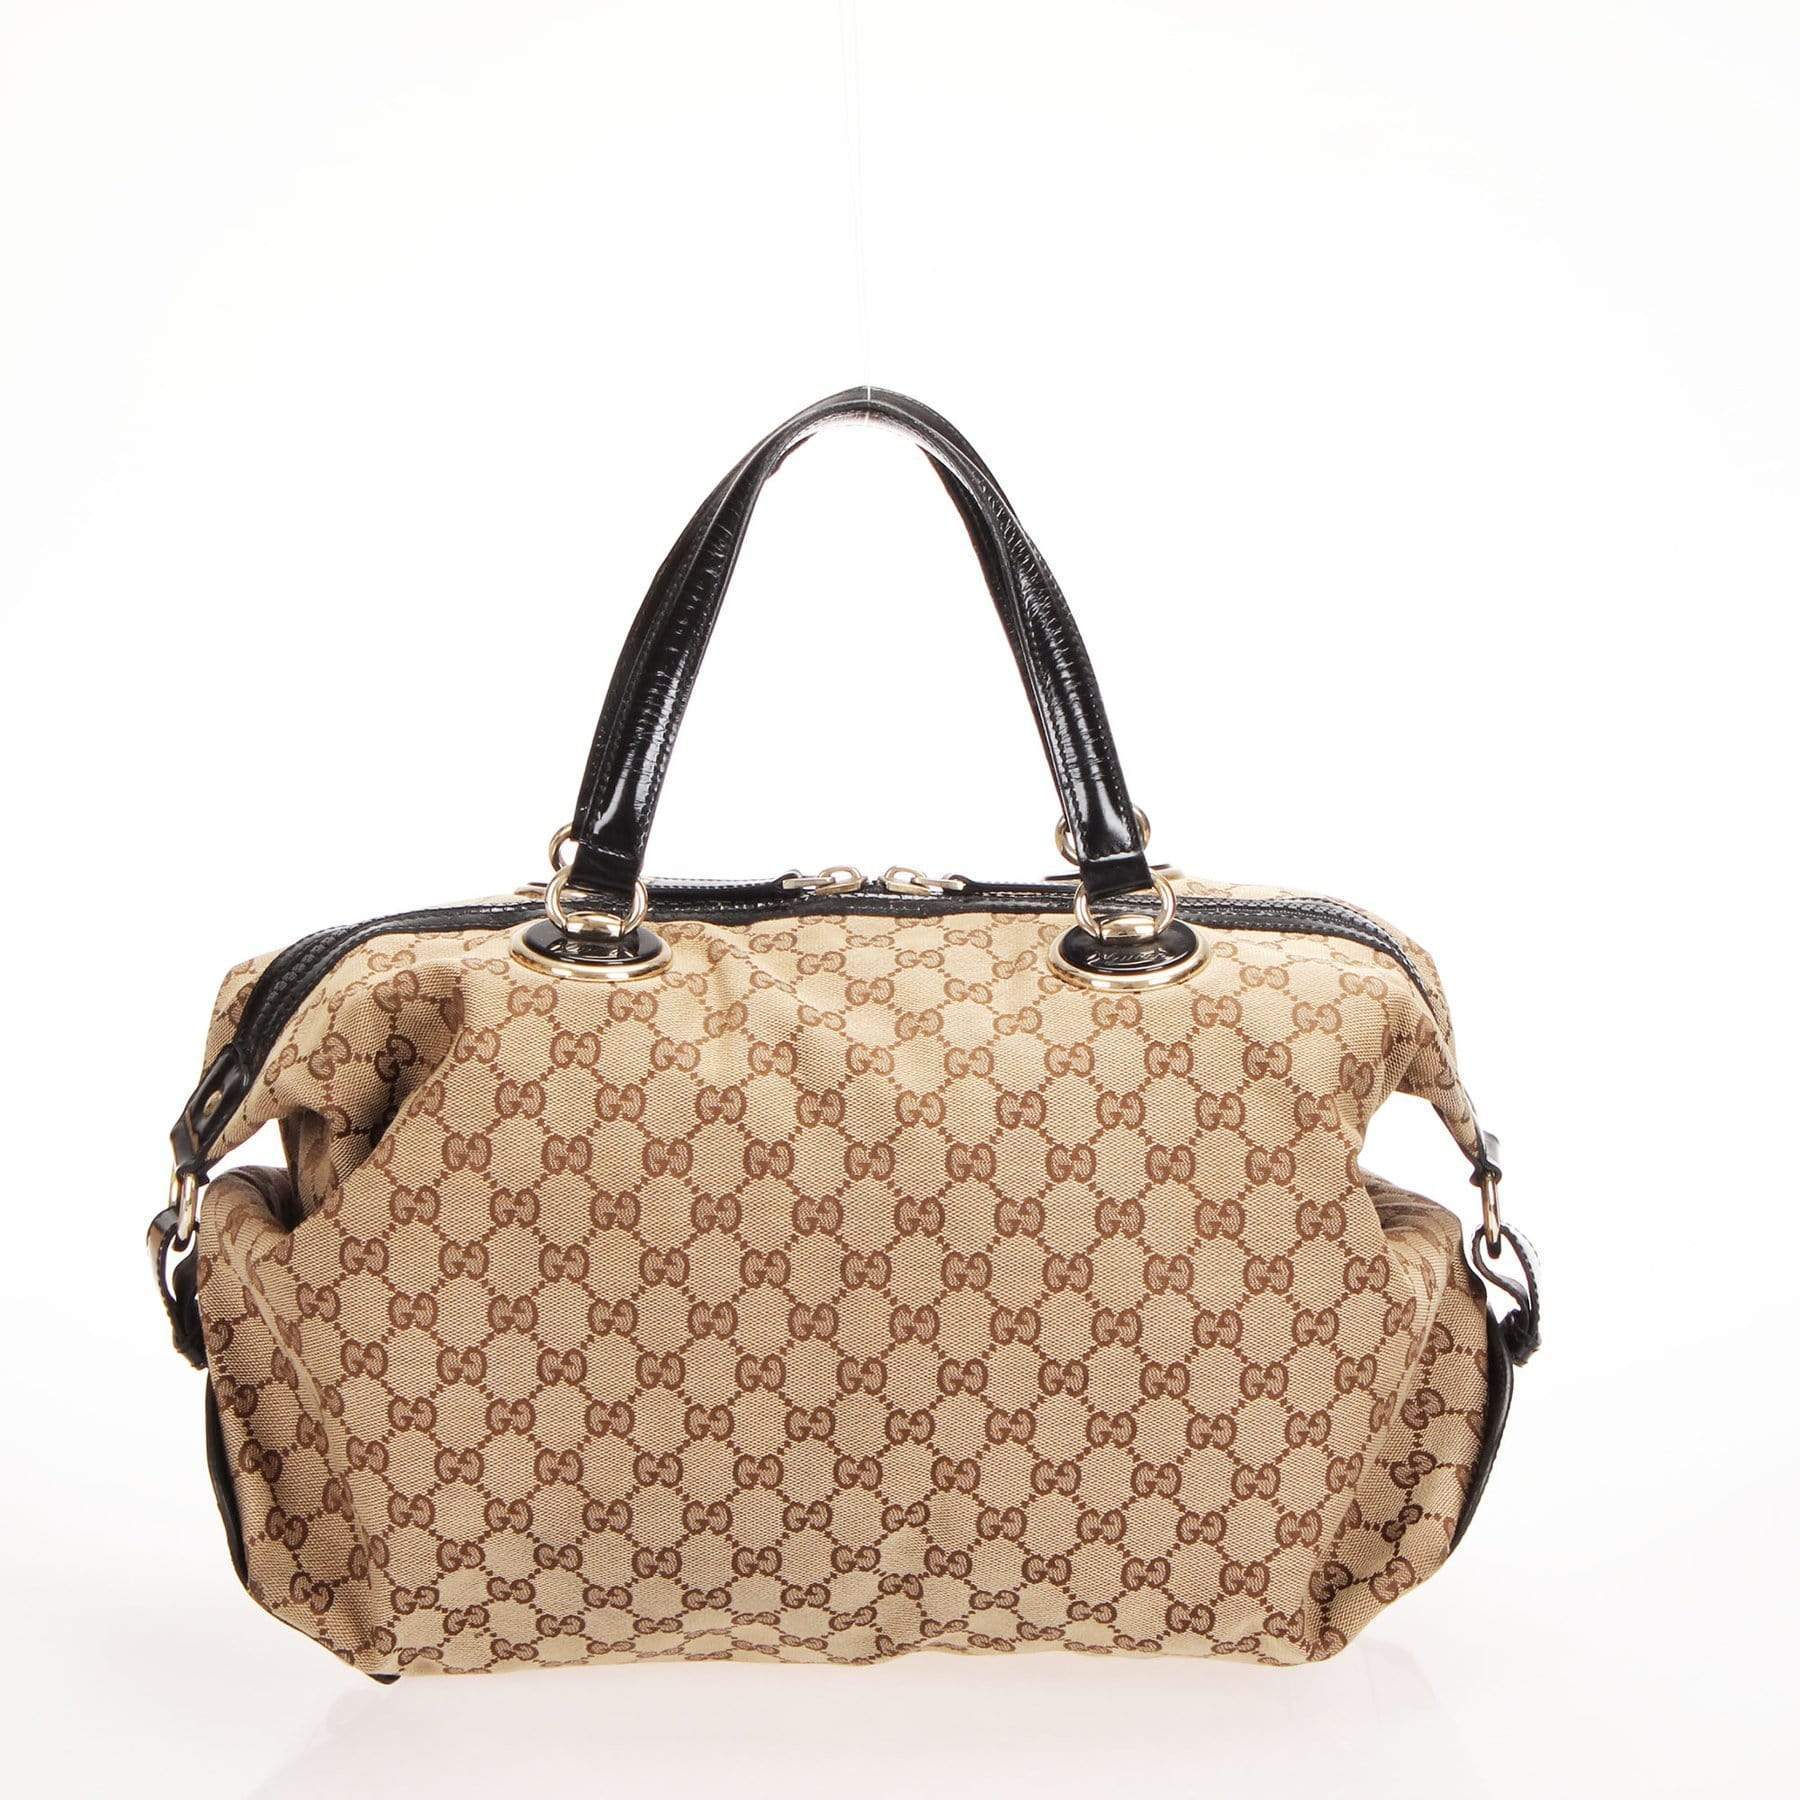 Gucci Monogram Canvas Full Moon Large Tote Bag – Just Gorgeous